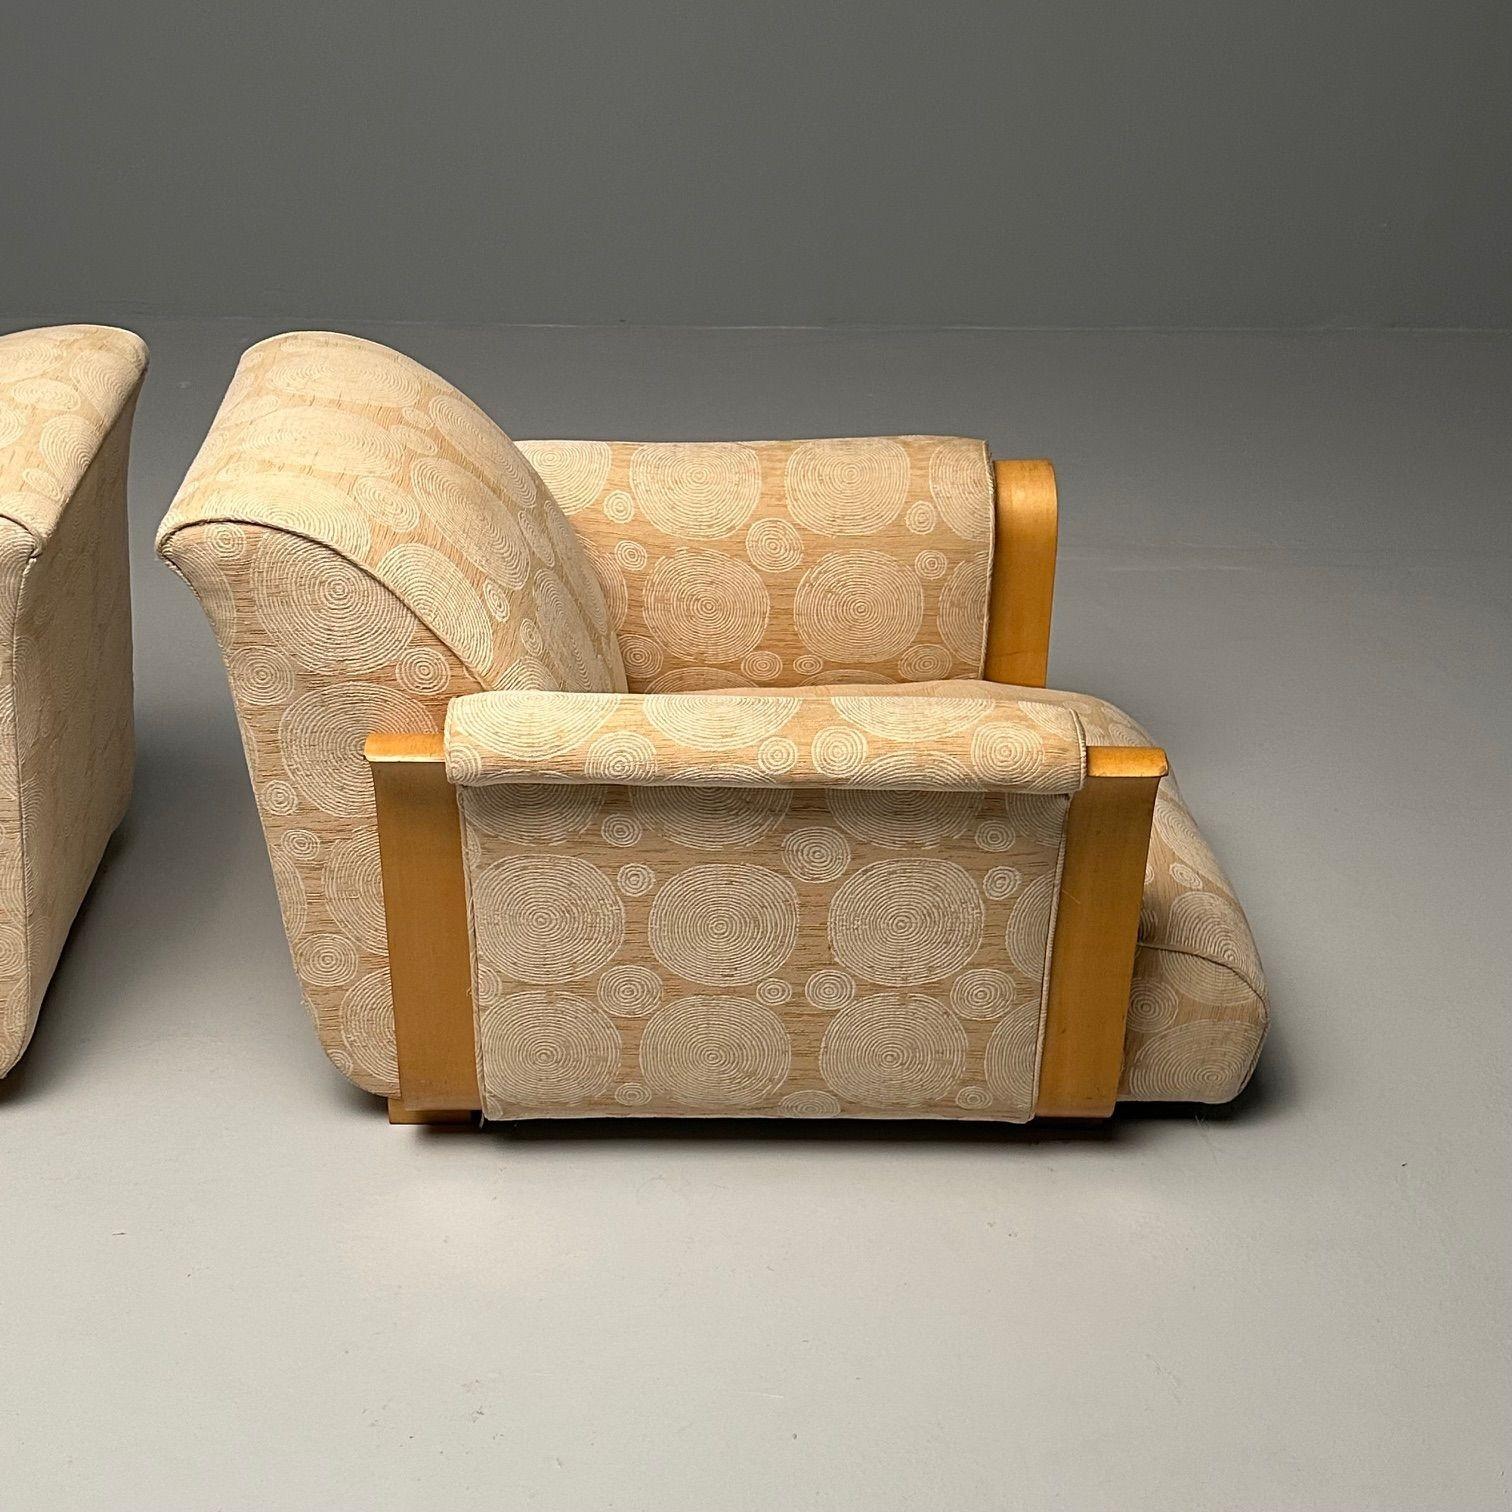 Rare Pair of French Art Deco Lounge Chairs by Michel Dufet, France, 1930s For Sale 6